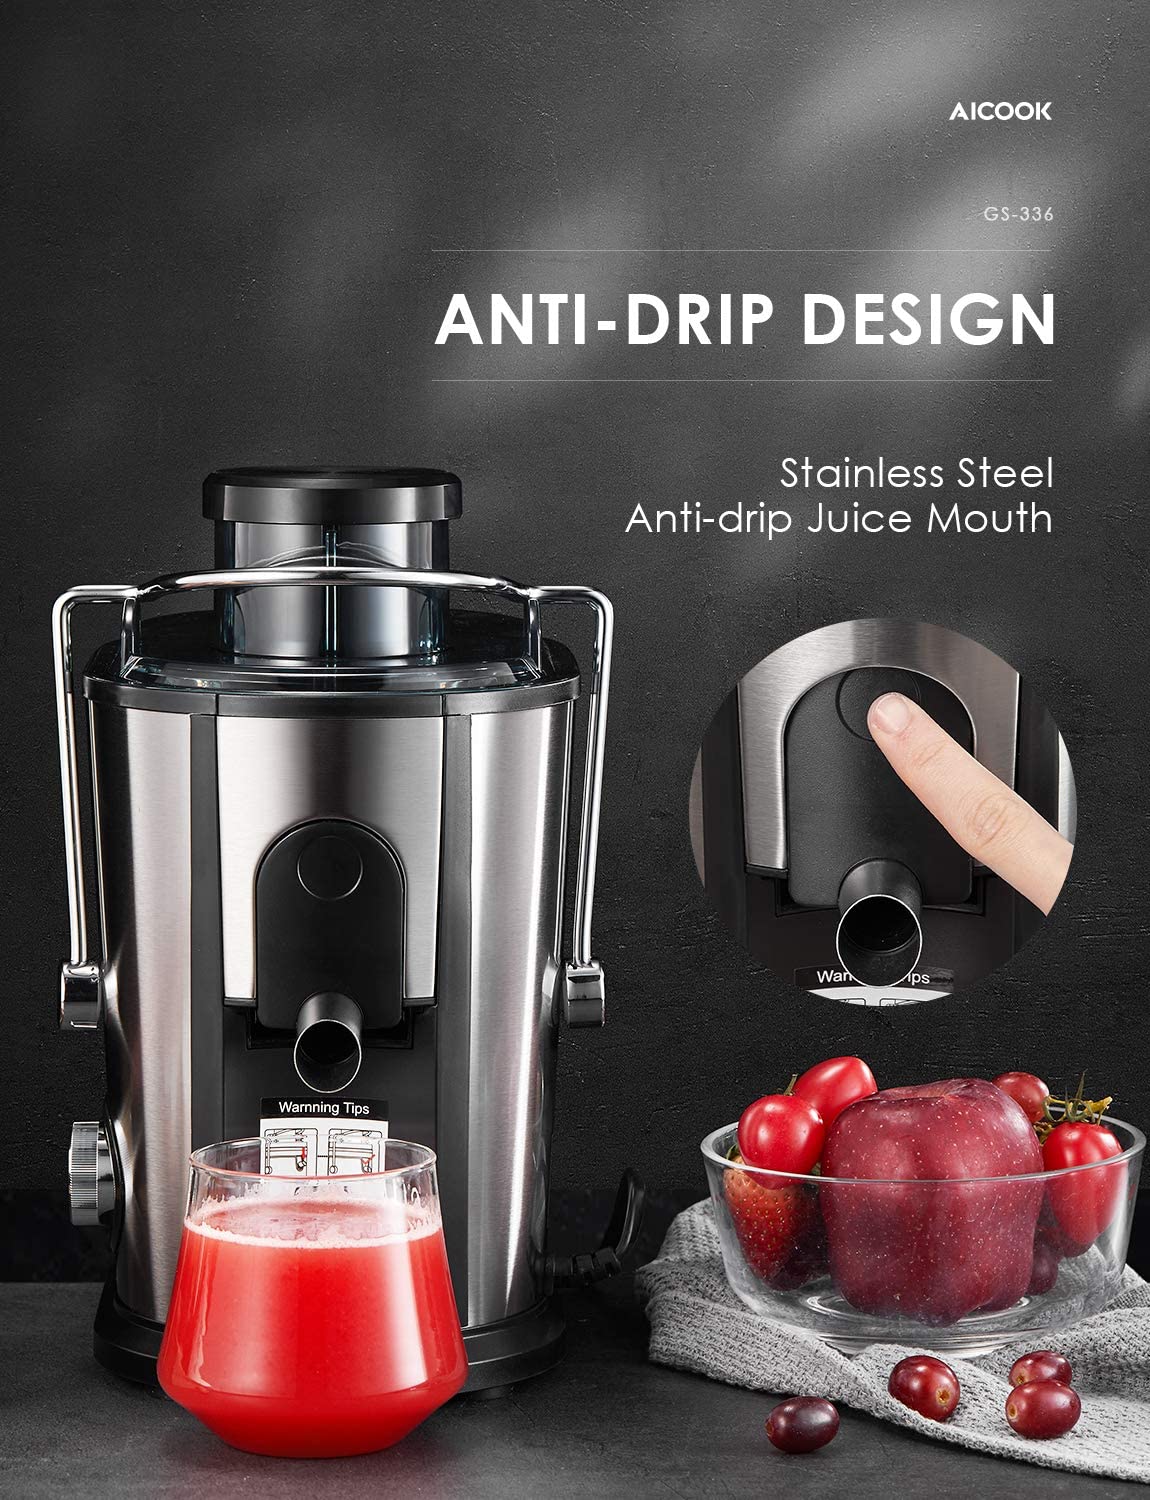 Juicer Wide Mouth Juice Extractor, Aicook Juicer Machines BPA Free Compact Fruits & Vegetables Juicer, Dual Speed Centrifugal Juicer with Non-drip Function, Stainless Steel Juicers Easy to Clean